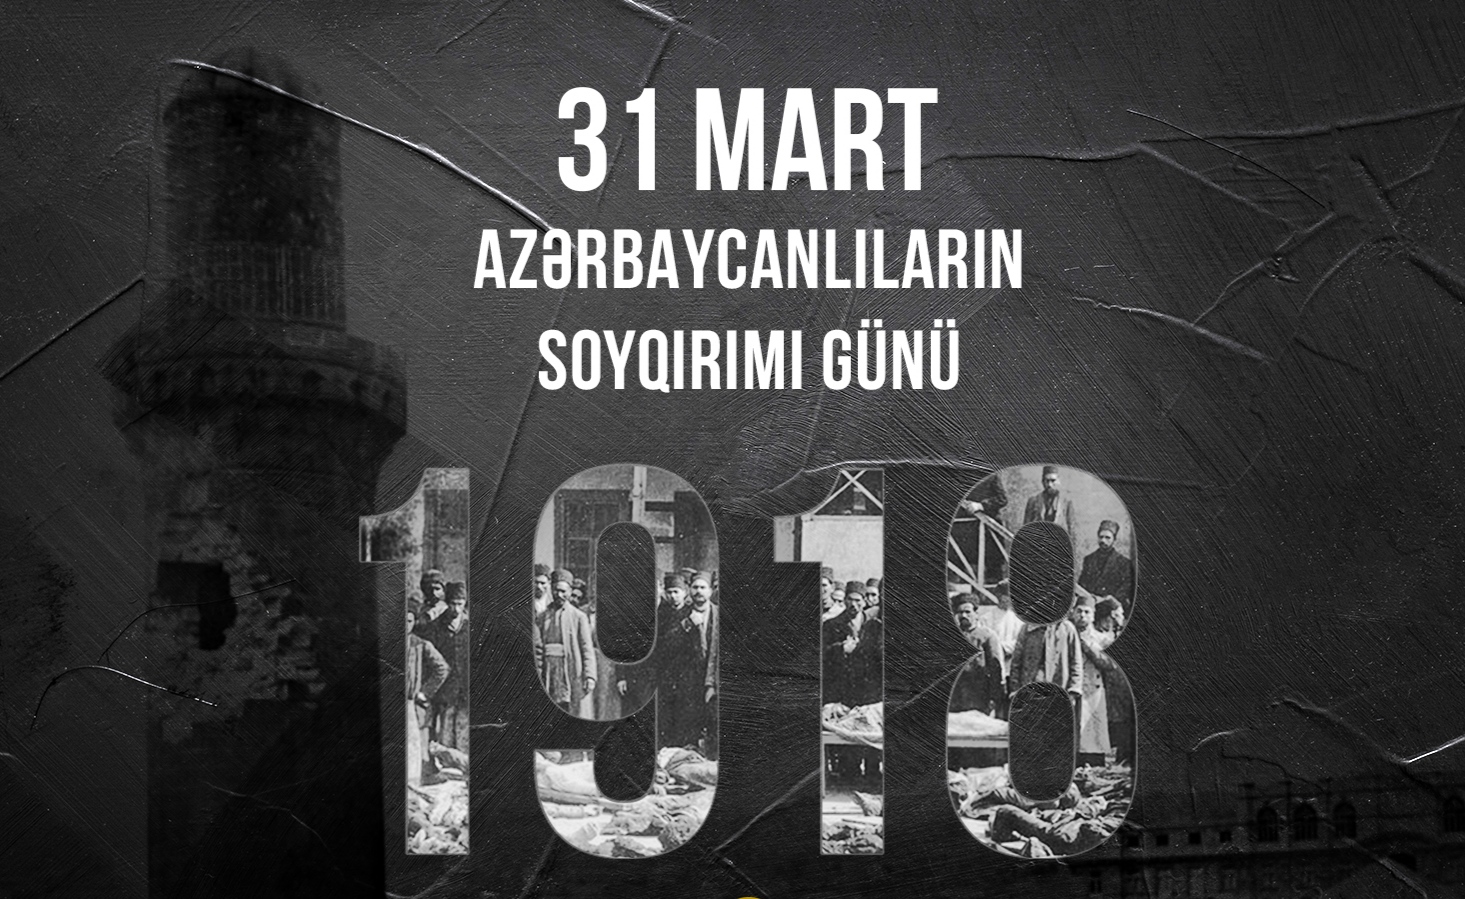 Day of Genocide of Azerbaijanis.